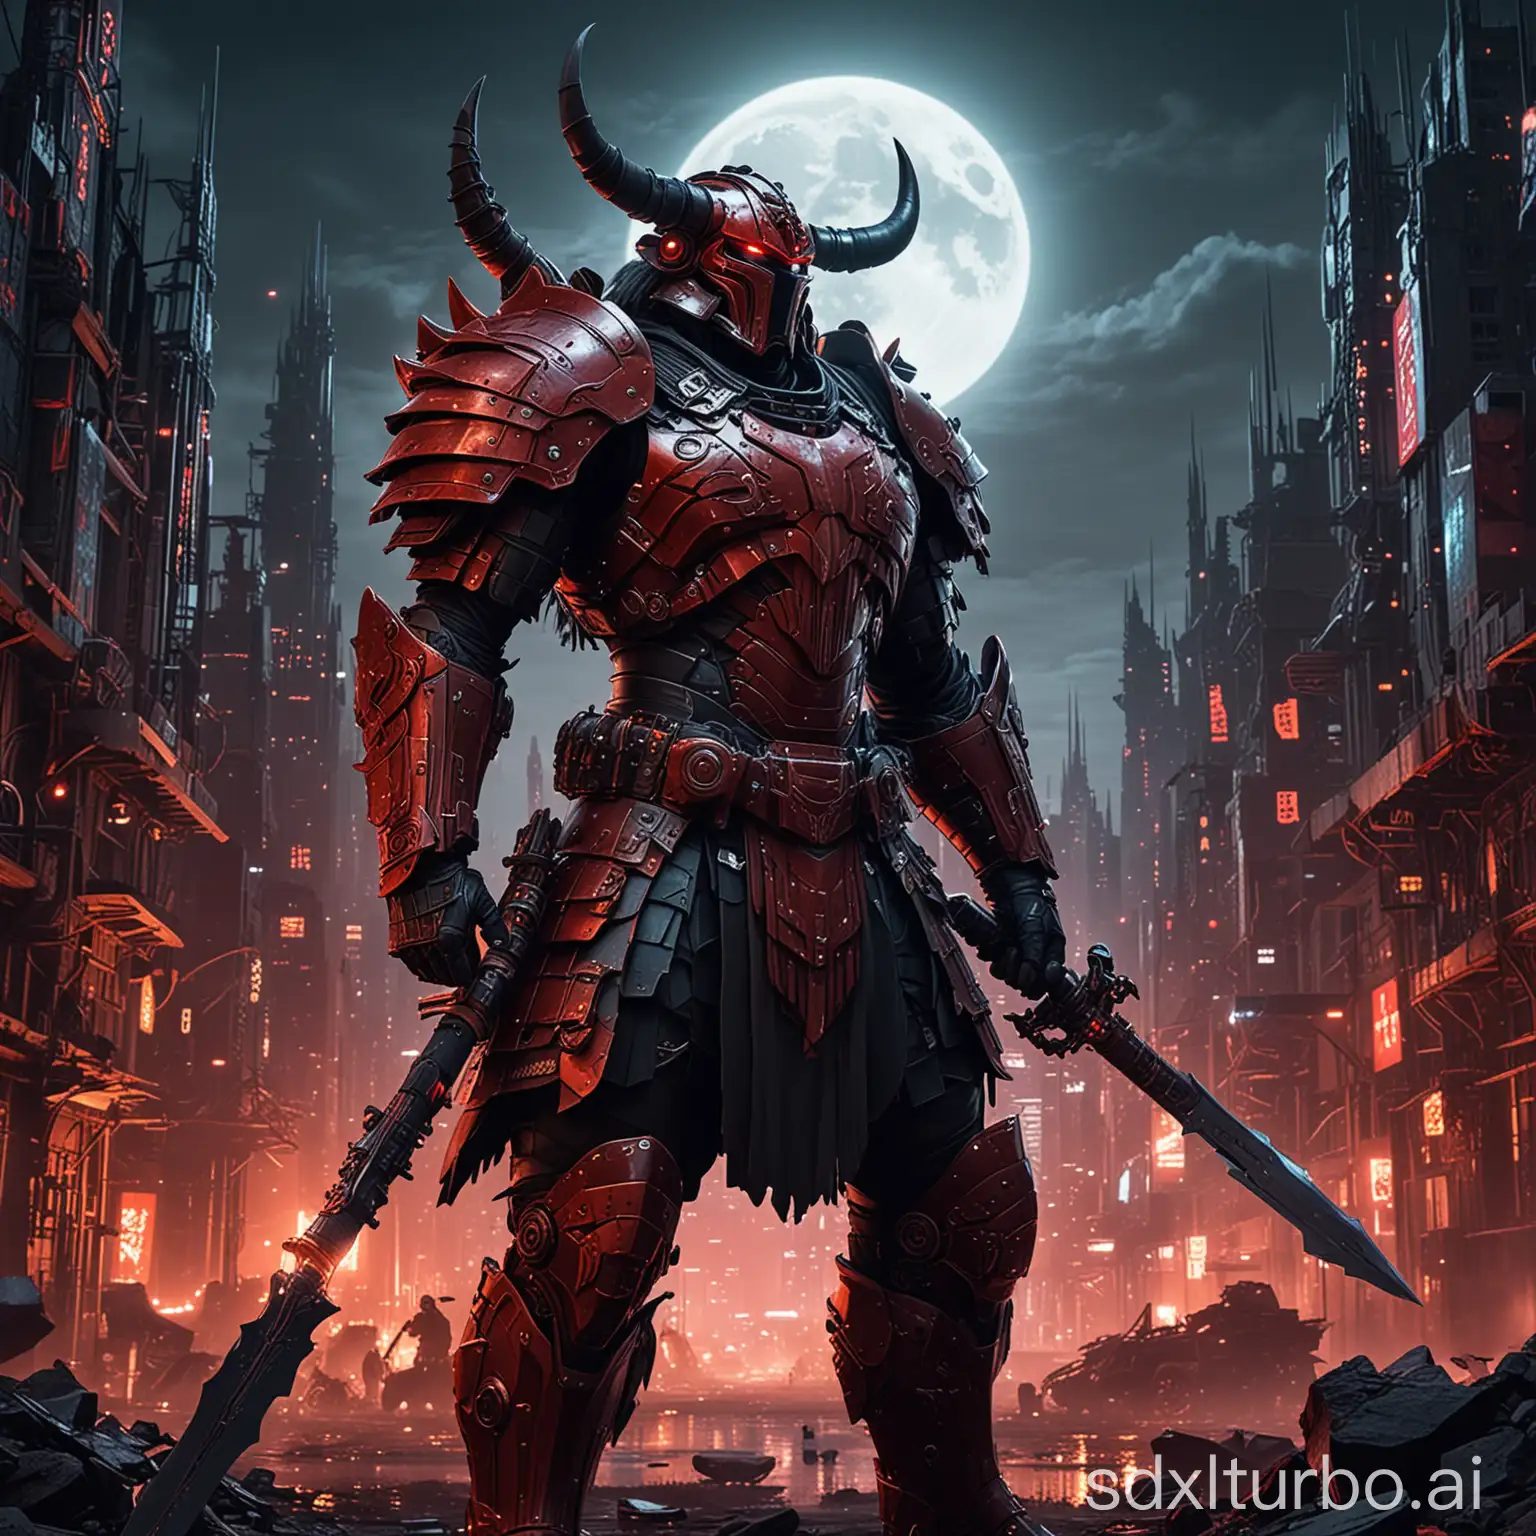 A Scottish Highlander warrior wearing futuristic powered armor inspired by the style of Masuzou Yuumen no Kami Masamitsu III in 'Armored Demon Village', standing amidst the ruins of a modern city at night. This warrior is massive, approximately 4-5 meters tall, clad in armor designed in shades of dark red and black, and has four arms, each wielding different weapons, including a massive high-tech lance. The armor features intricate details and symbols, combined with futuristic elements such as thrusters and mechanical parts. The scene is illuminated by neon lights and the glow of the armor system, while the moon casts a seductive red hue, rendering the city like hell, starkly contrasting with the darkness and futuristic urban landscape.